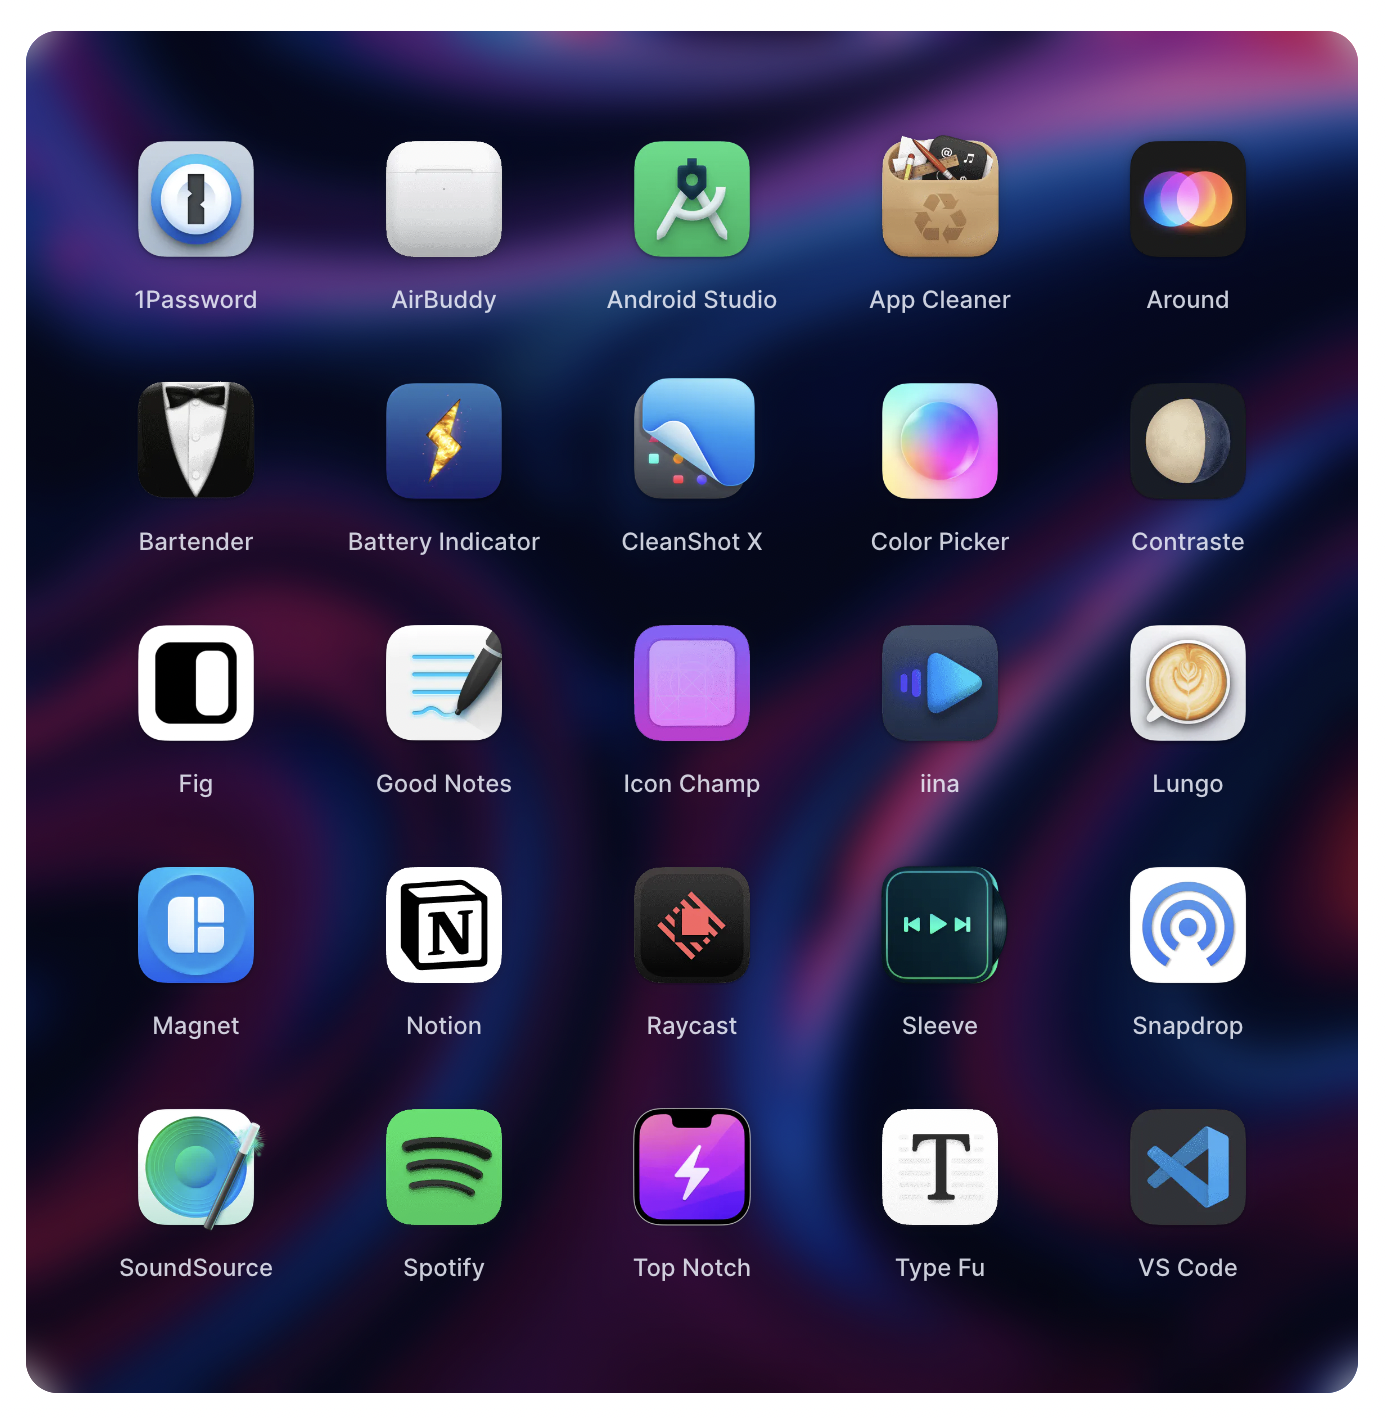 Grid showing different MacOS apps